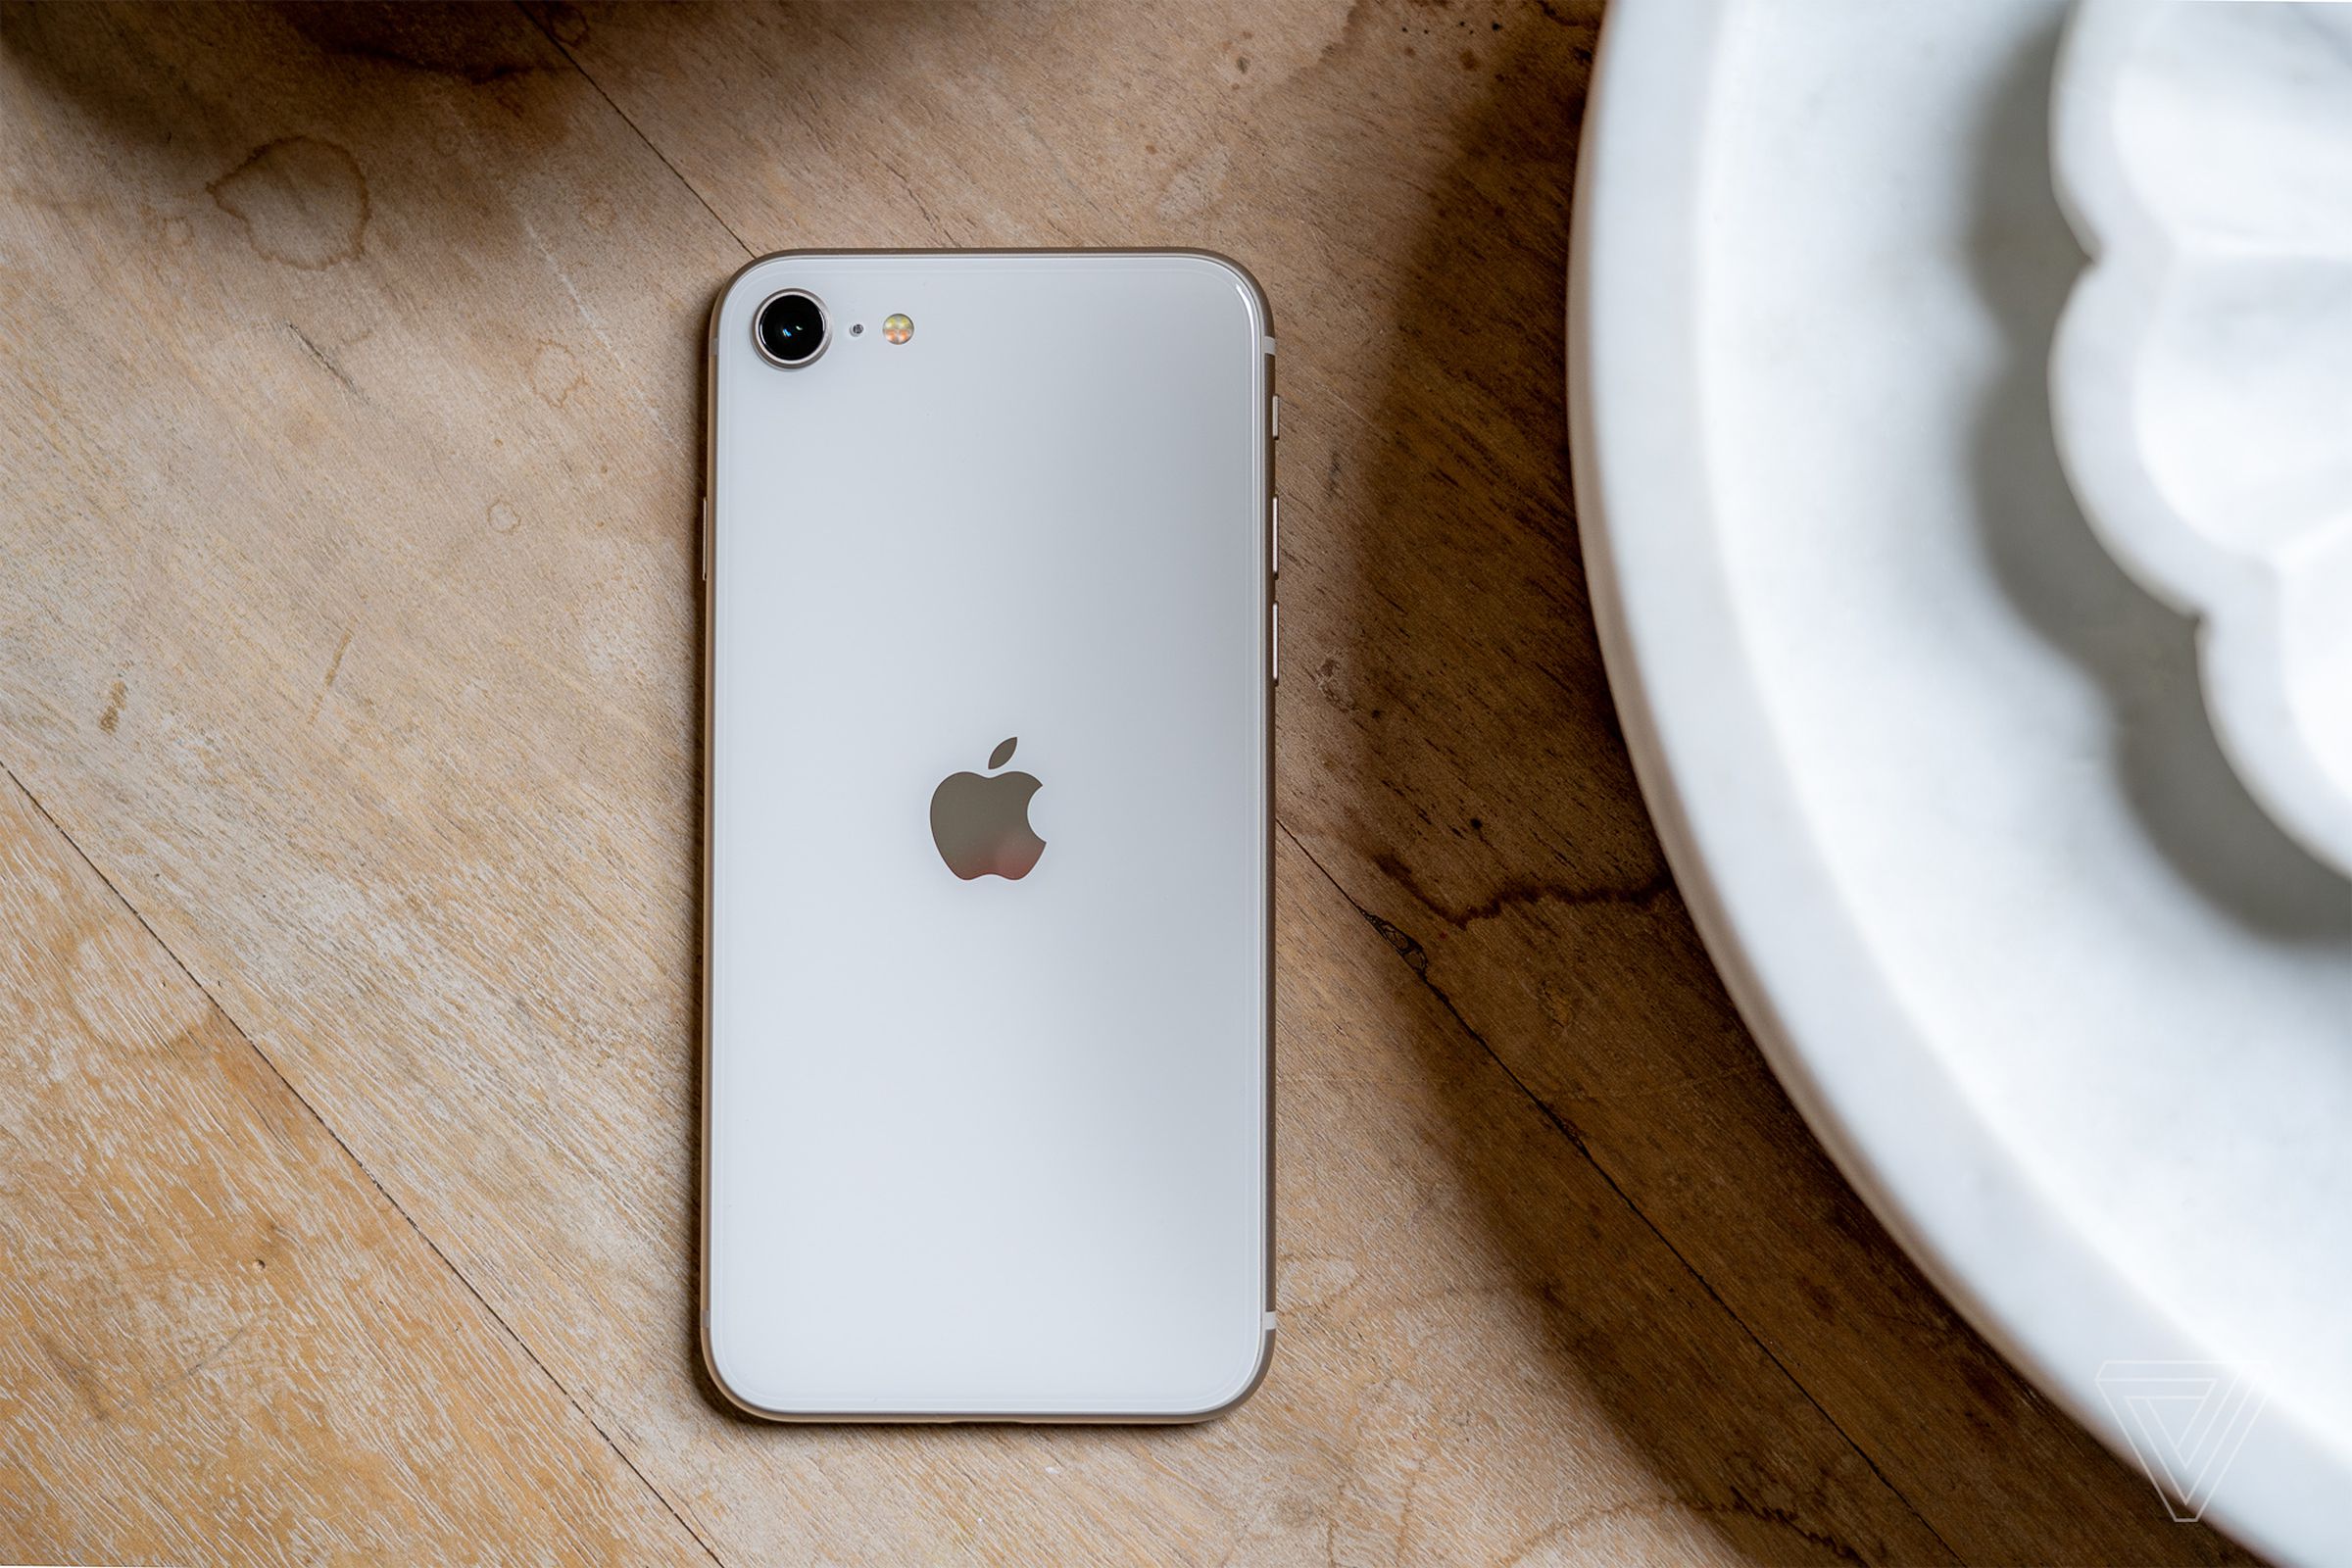 Photo of an iPhone SE 2022 laying on a wooden table next to some plates.